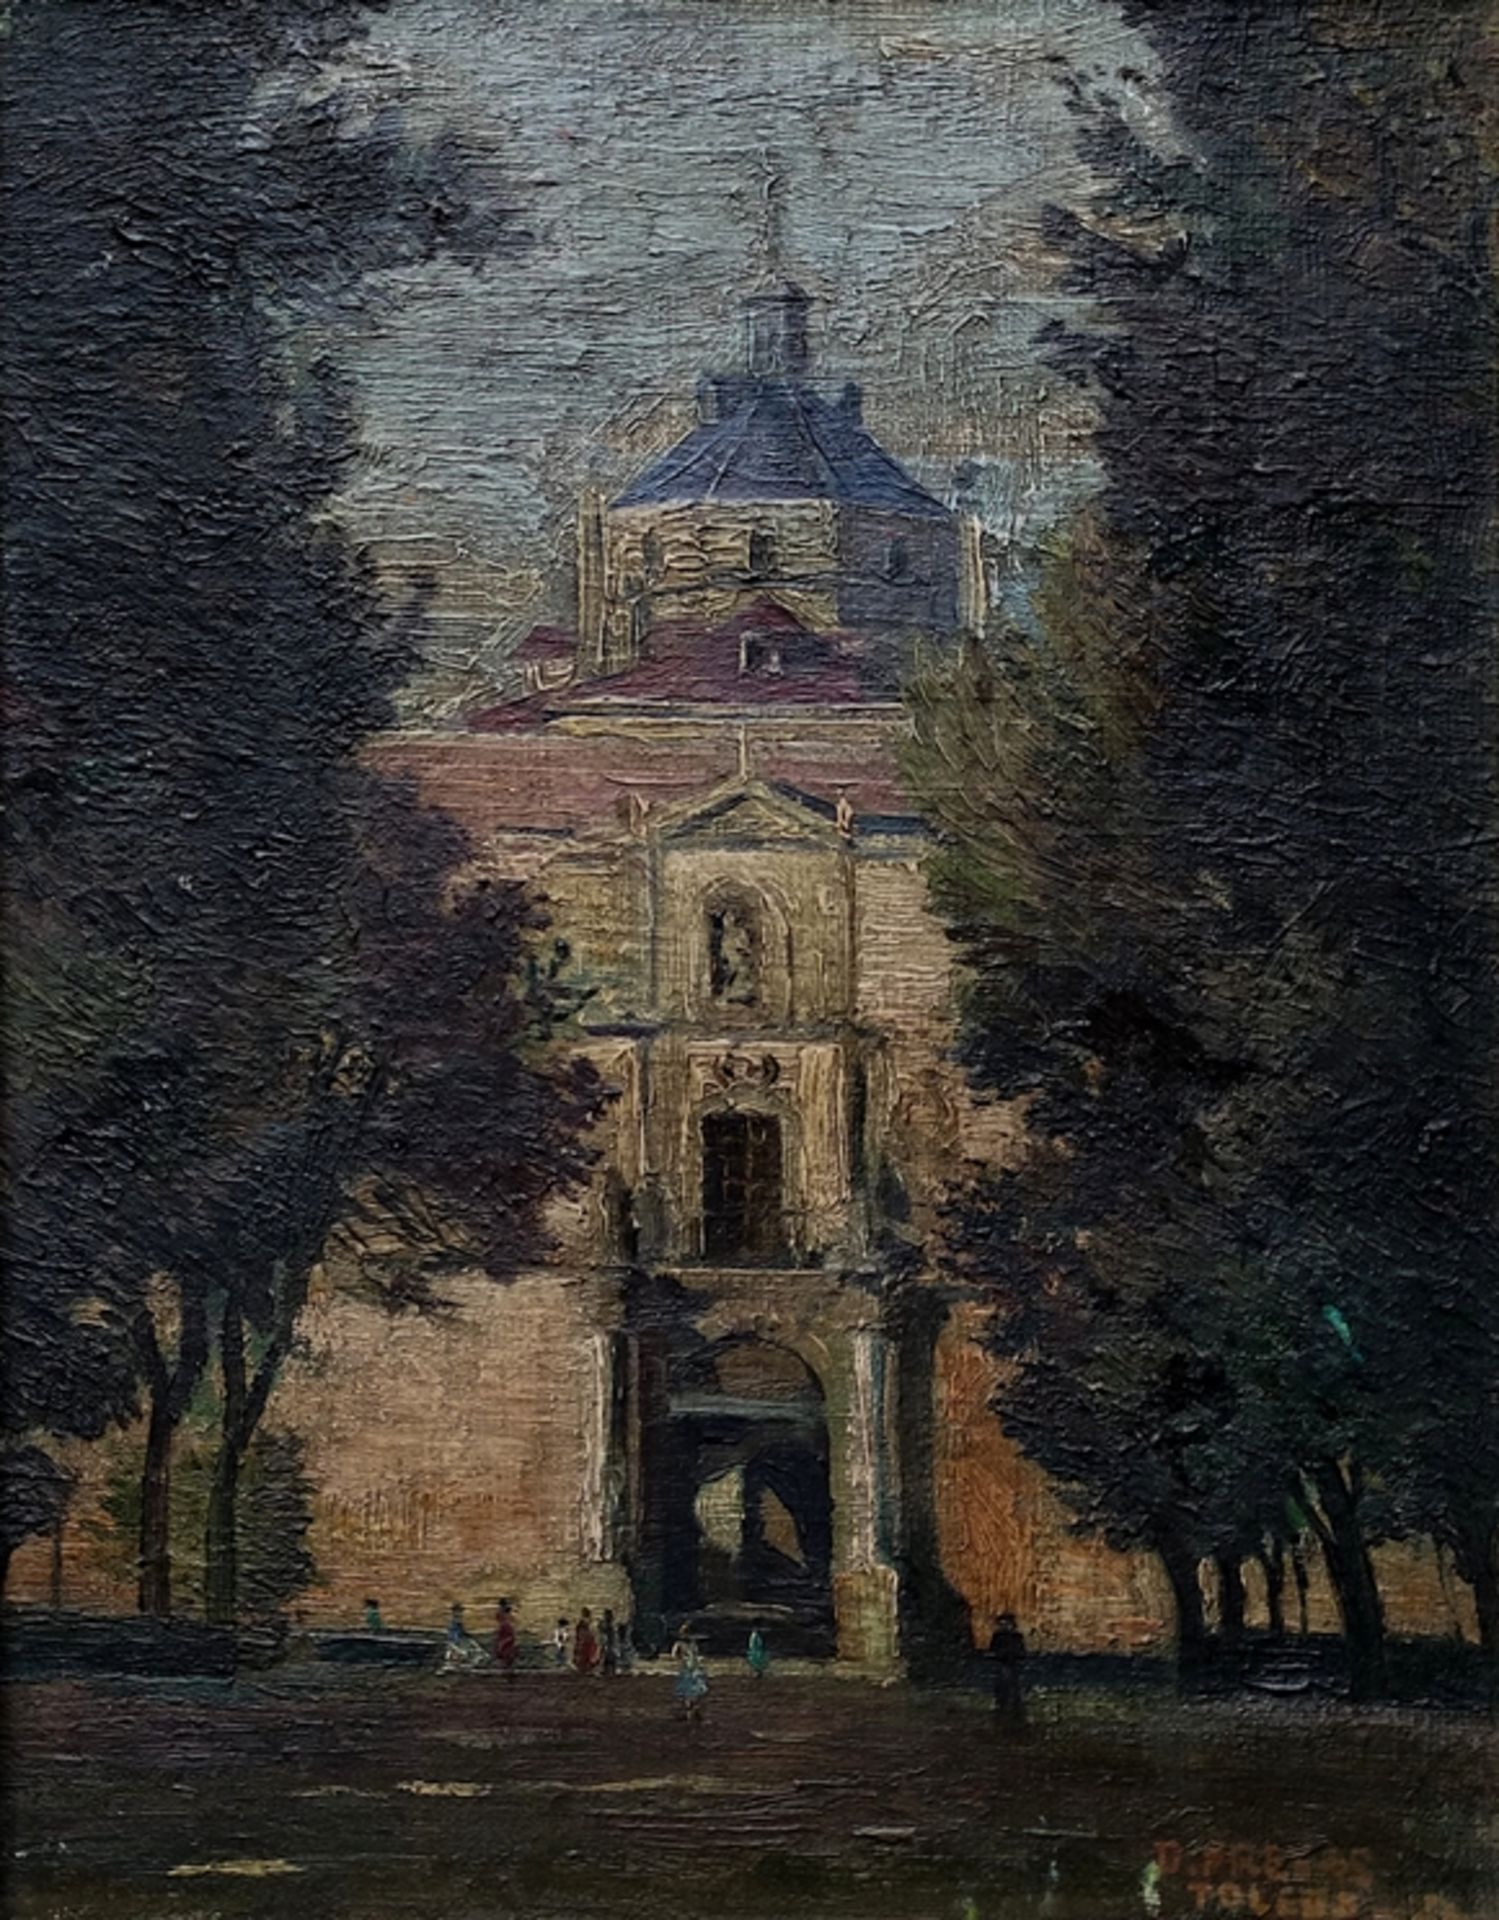 Frexas, Dolores "Lola" (1924 - 2011) "Hospital de Tavera", in Toleda, oil on canvas, signed and ins